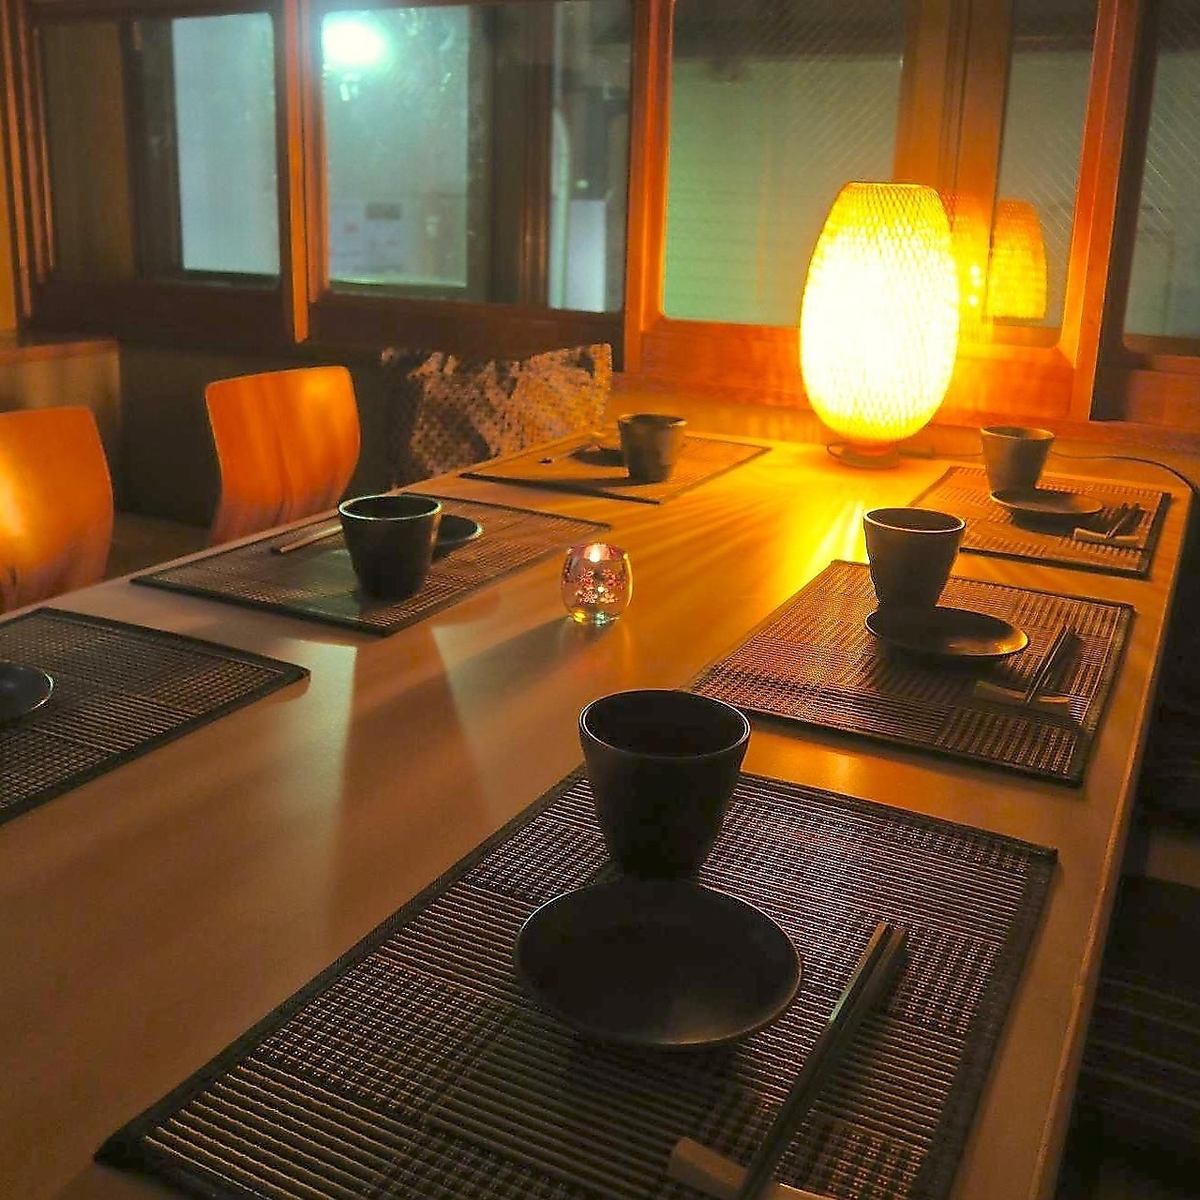 Please spend a relaxing and wonderful time in a tasteful Japanese space.